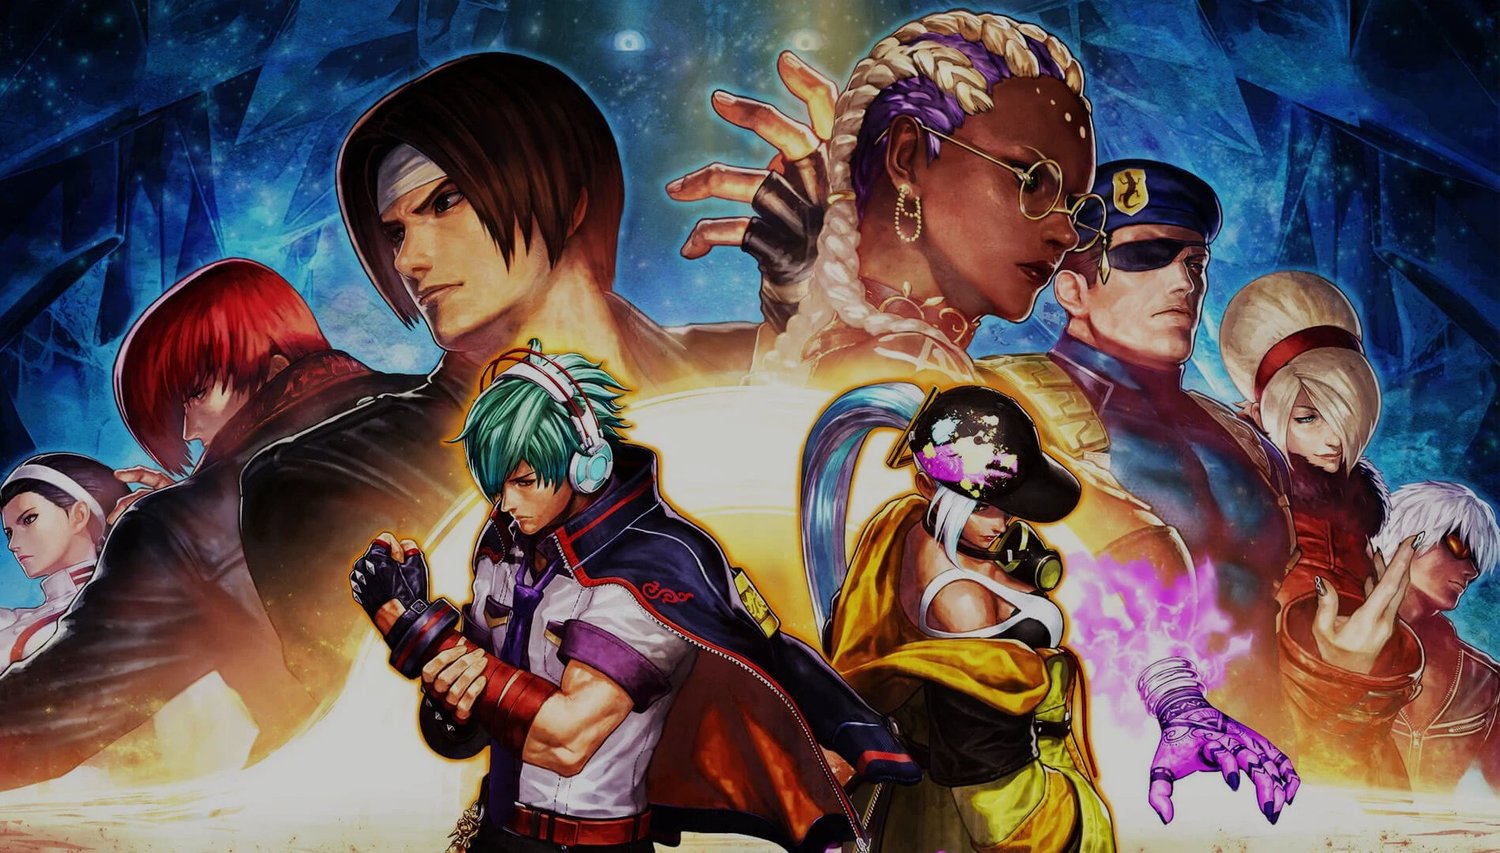 Free Character DLC and Game Mode joins The King of Fighters XV